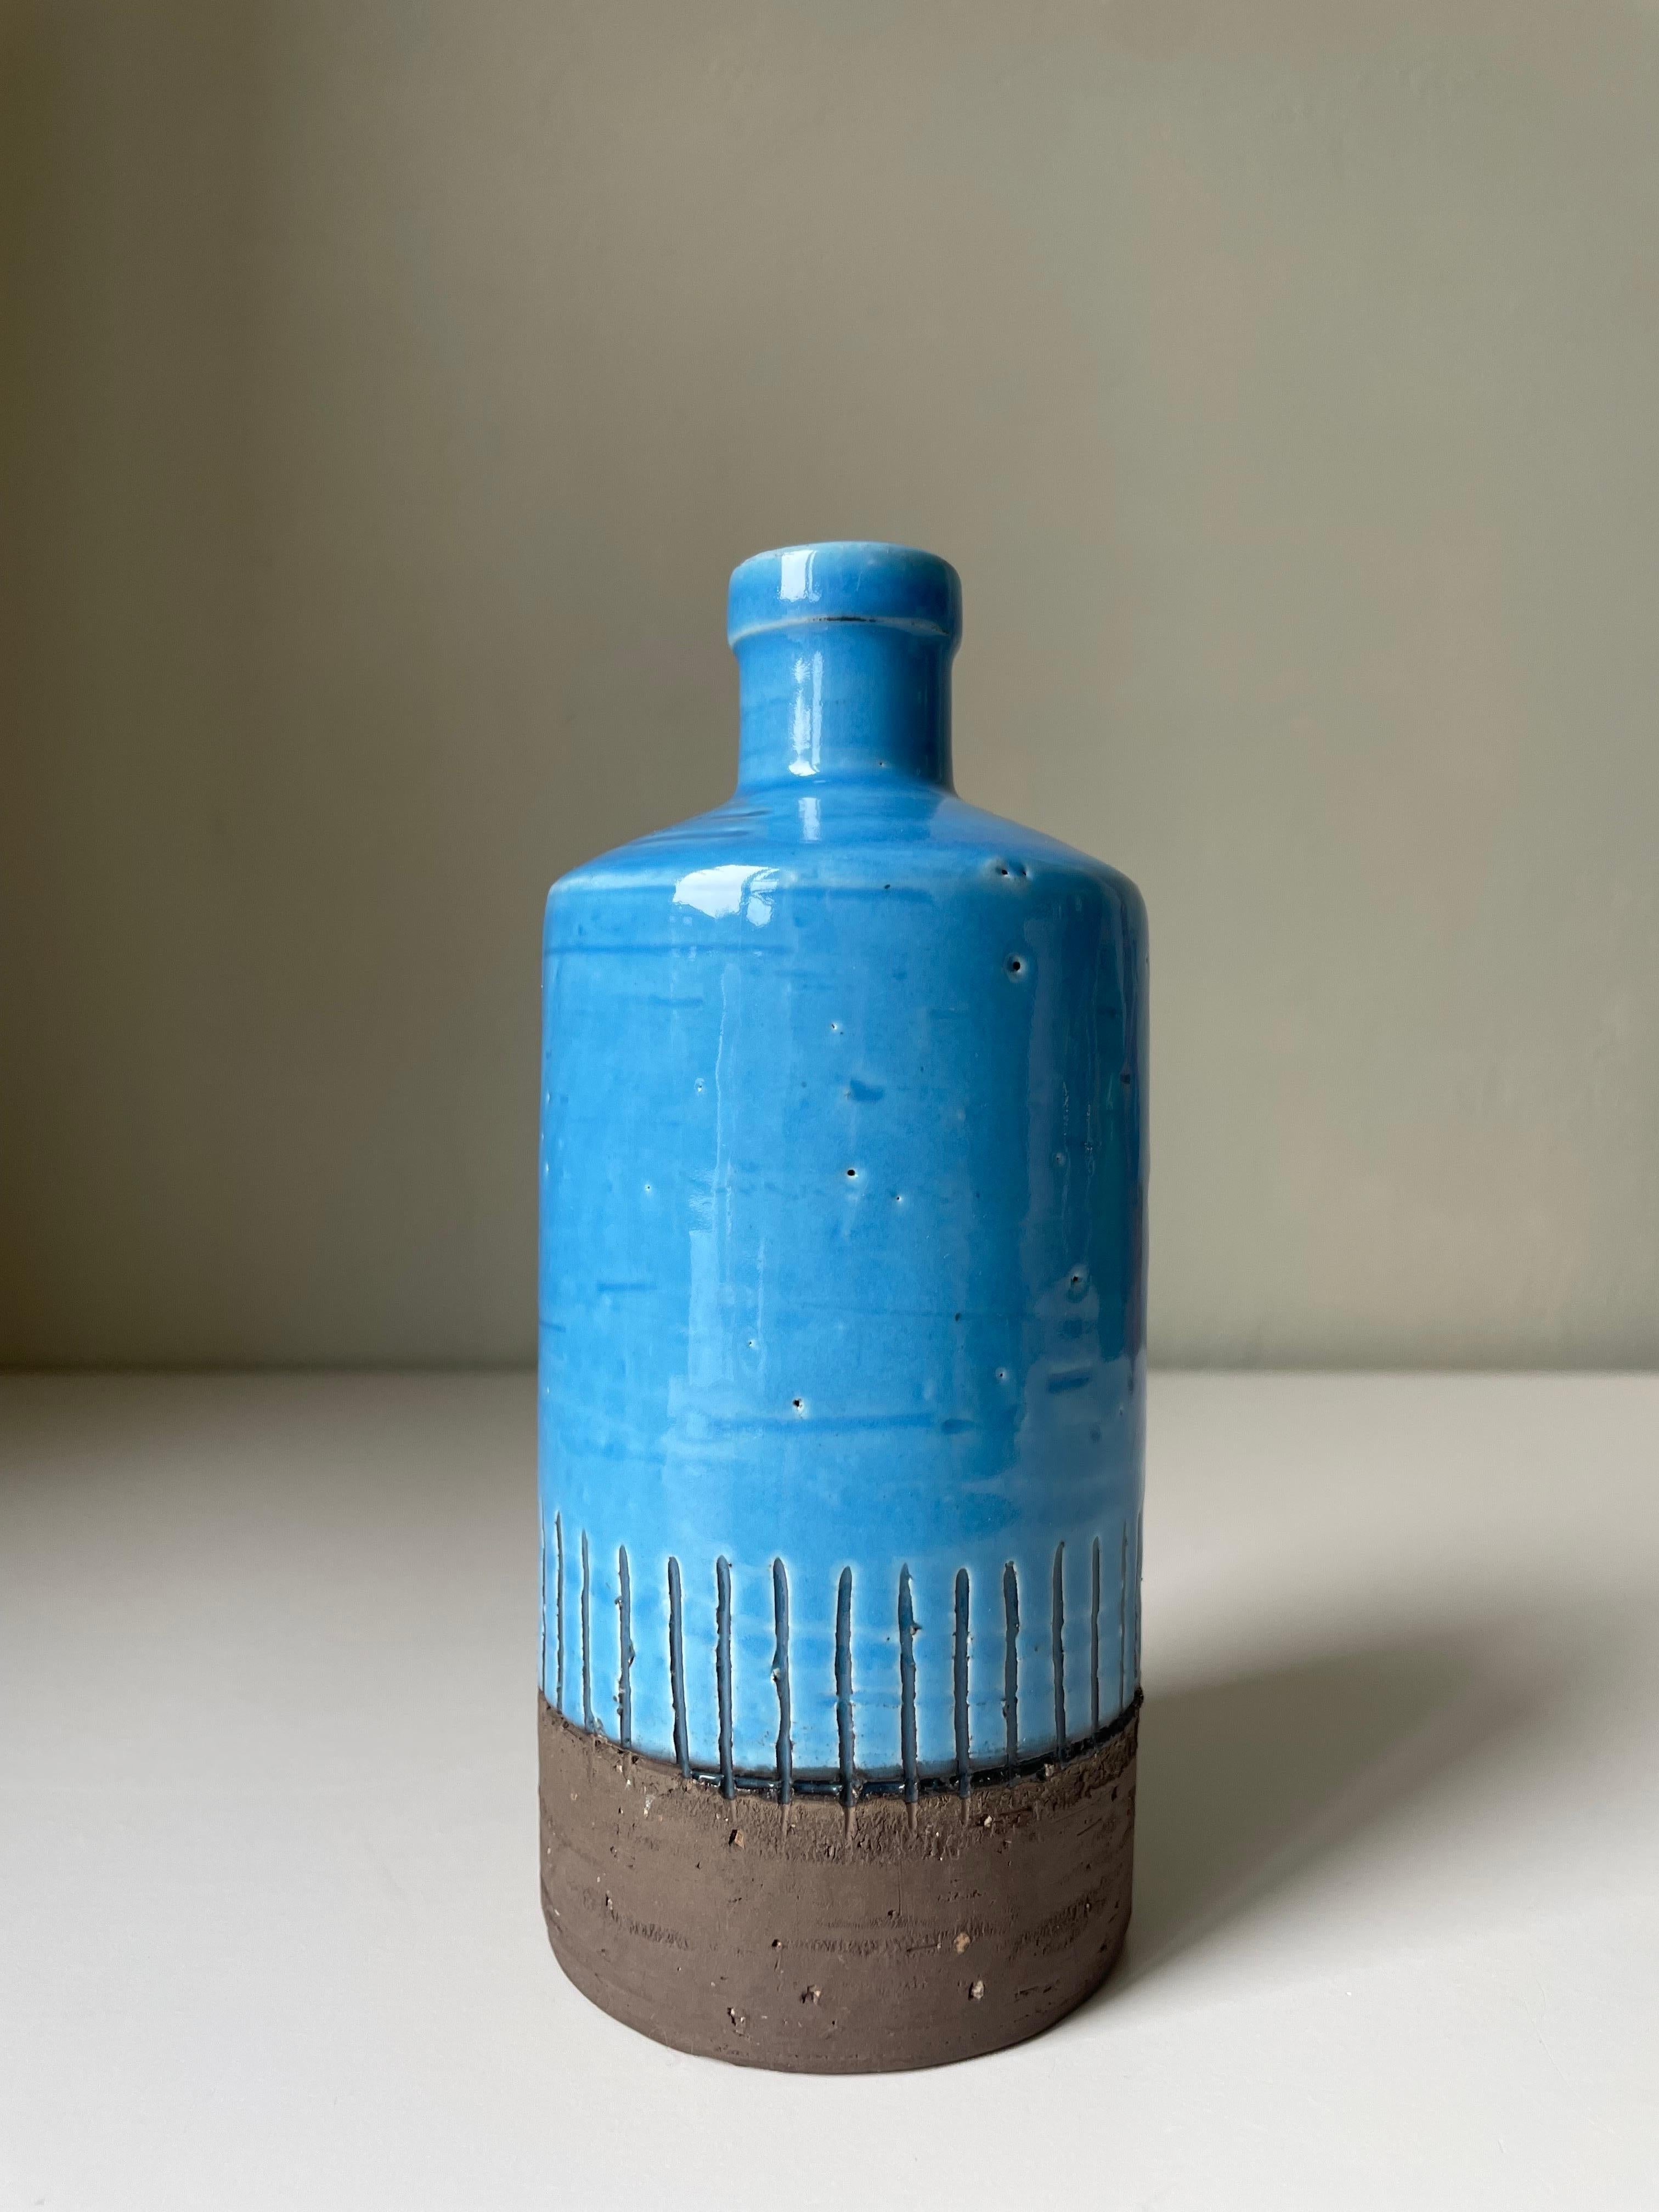 Handmade bottle shaped Swedish midcentury modern chamotte vase with bright blue turquoise glaze. Slender neck and cylinder shaped body. Bottom part left raw and unglazed and right above are handcarved relief lines toward the shiny blue glaze.